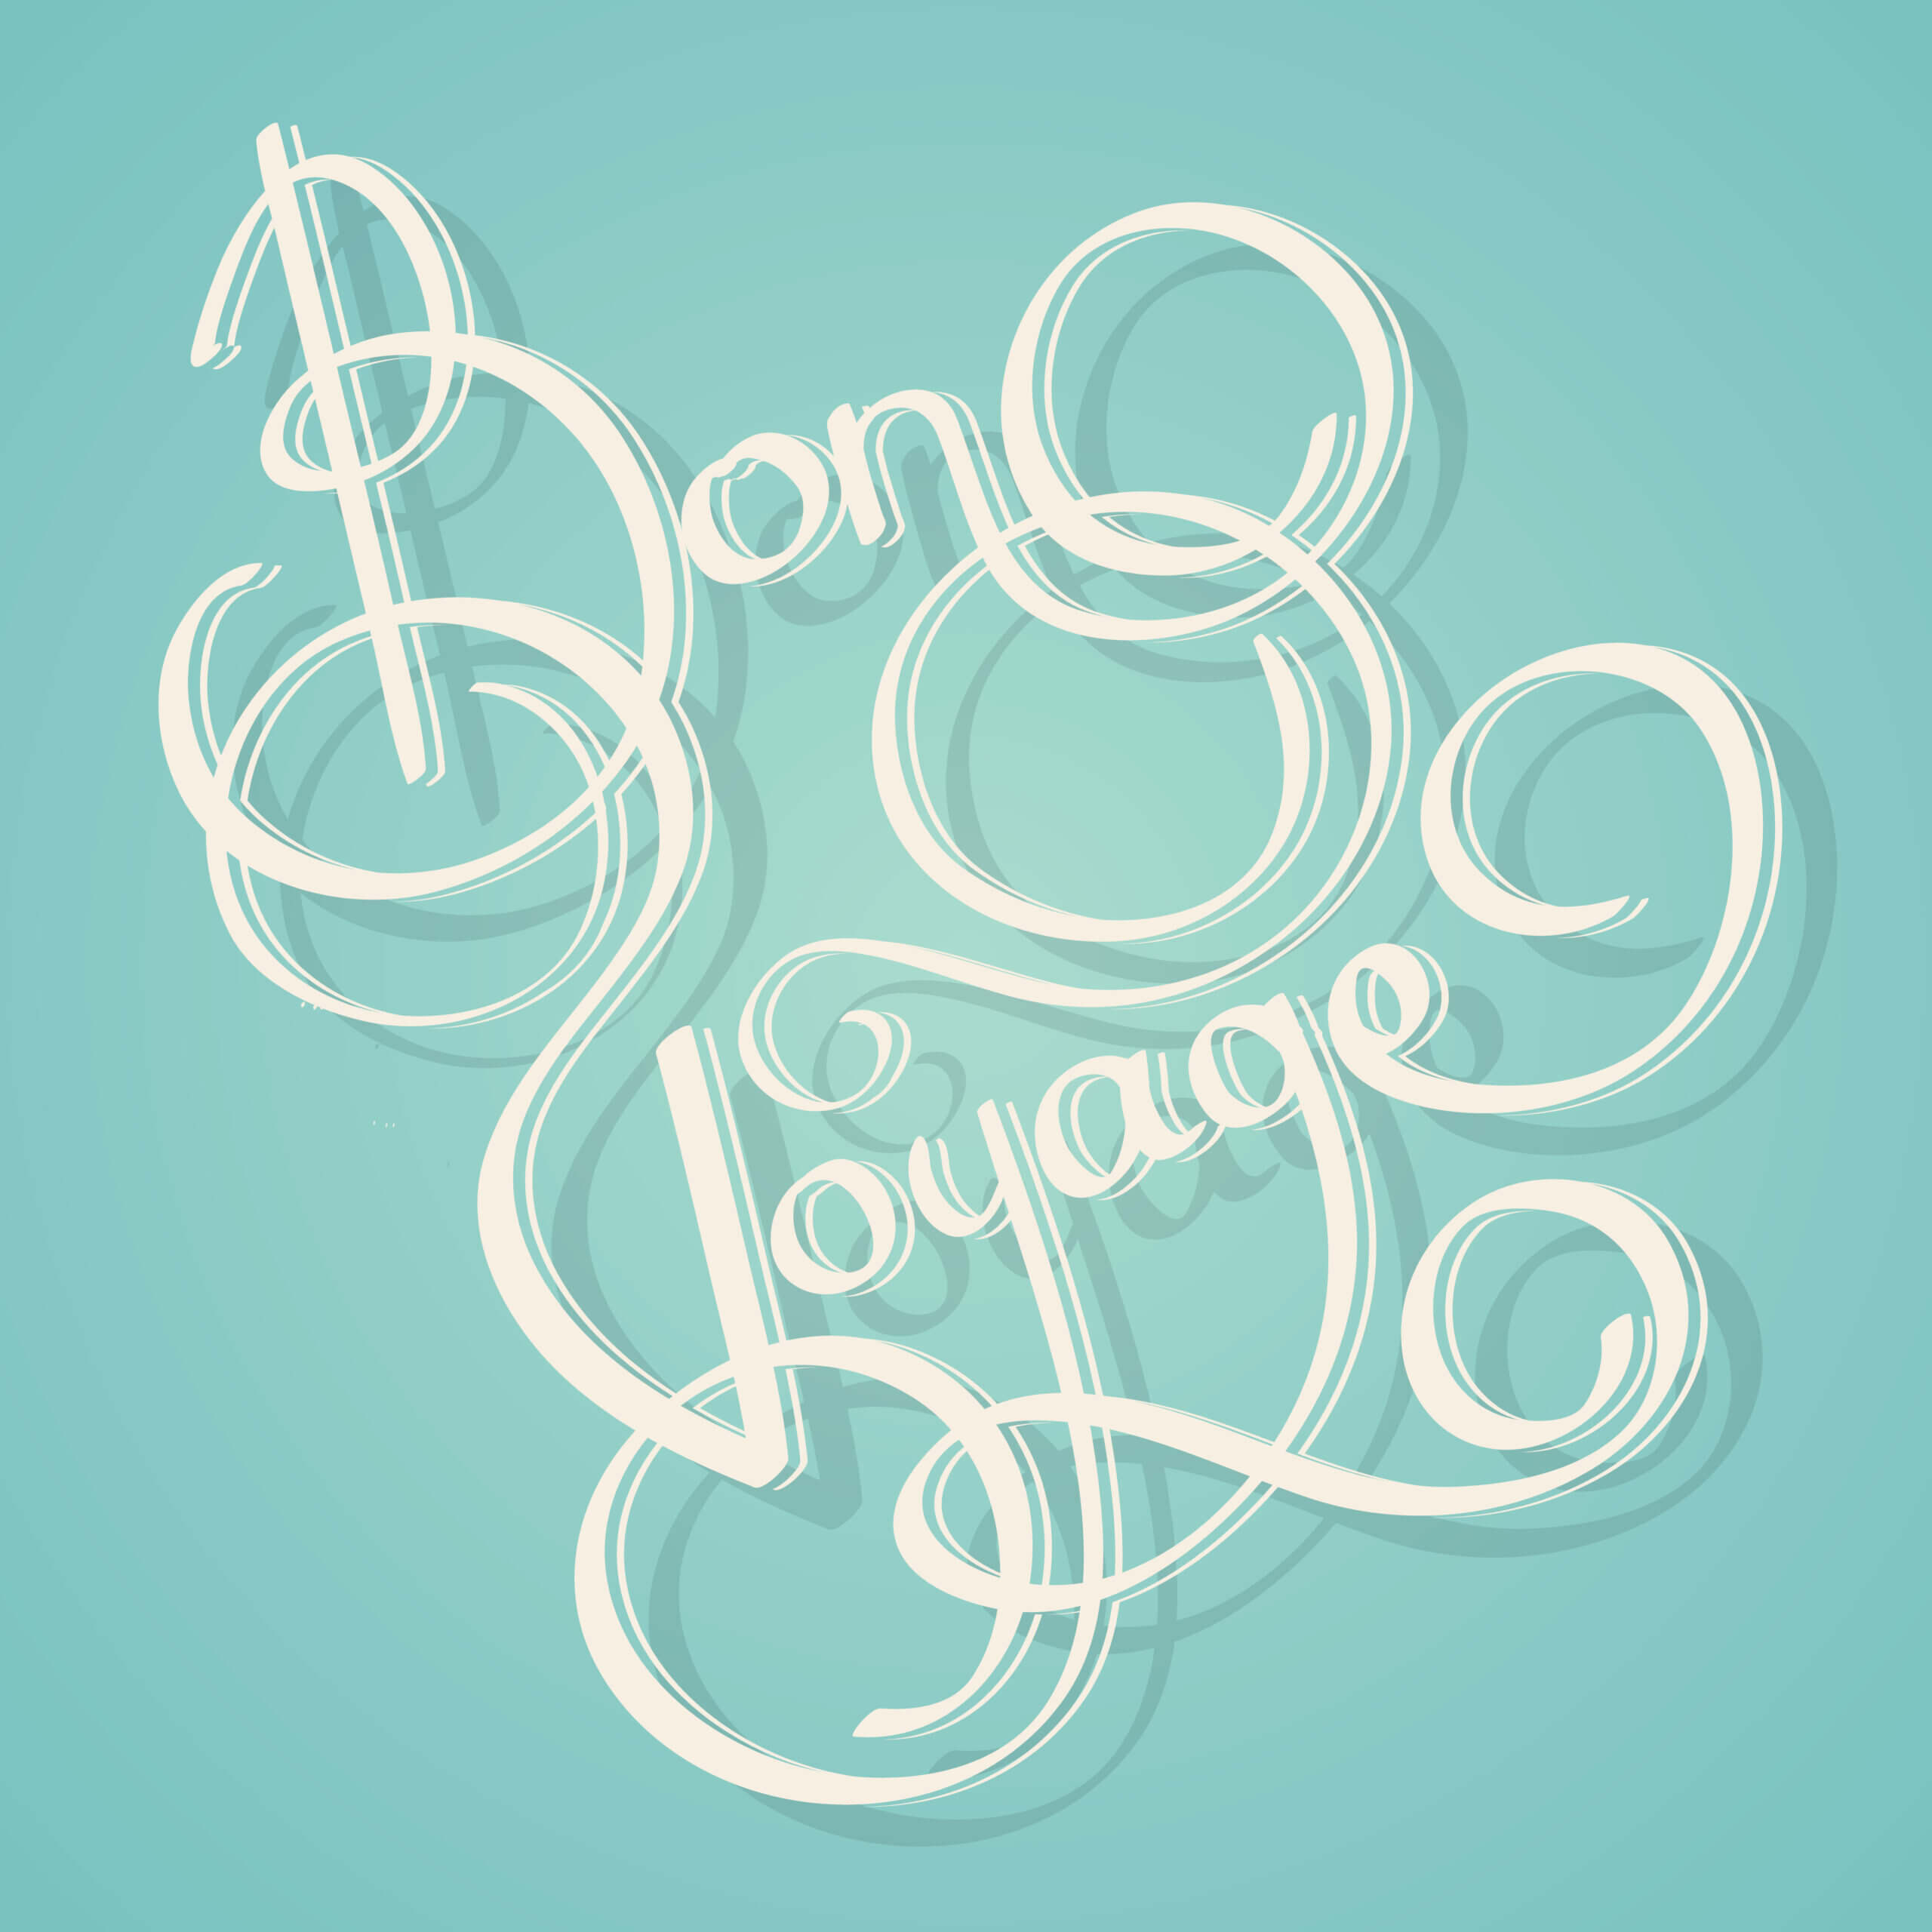 Calligraphy Bon Voyage Text – Download Free Vectors, Clipart Intended For Bon Voyage Card Template